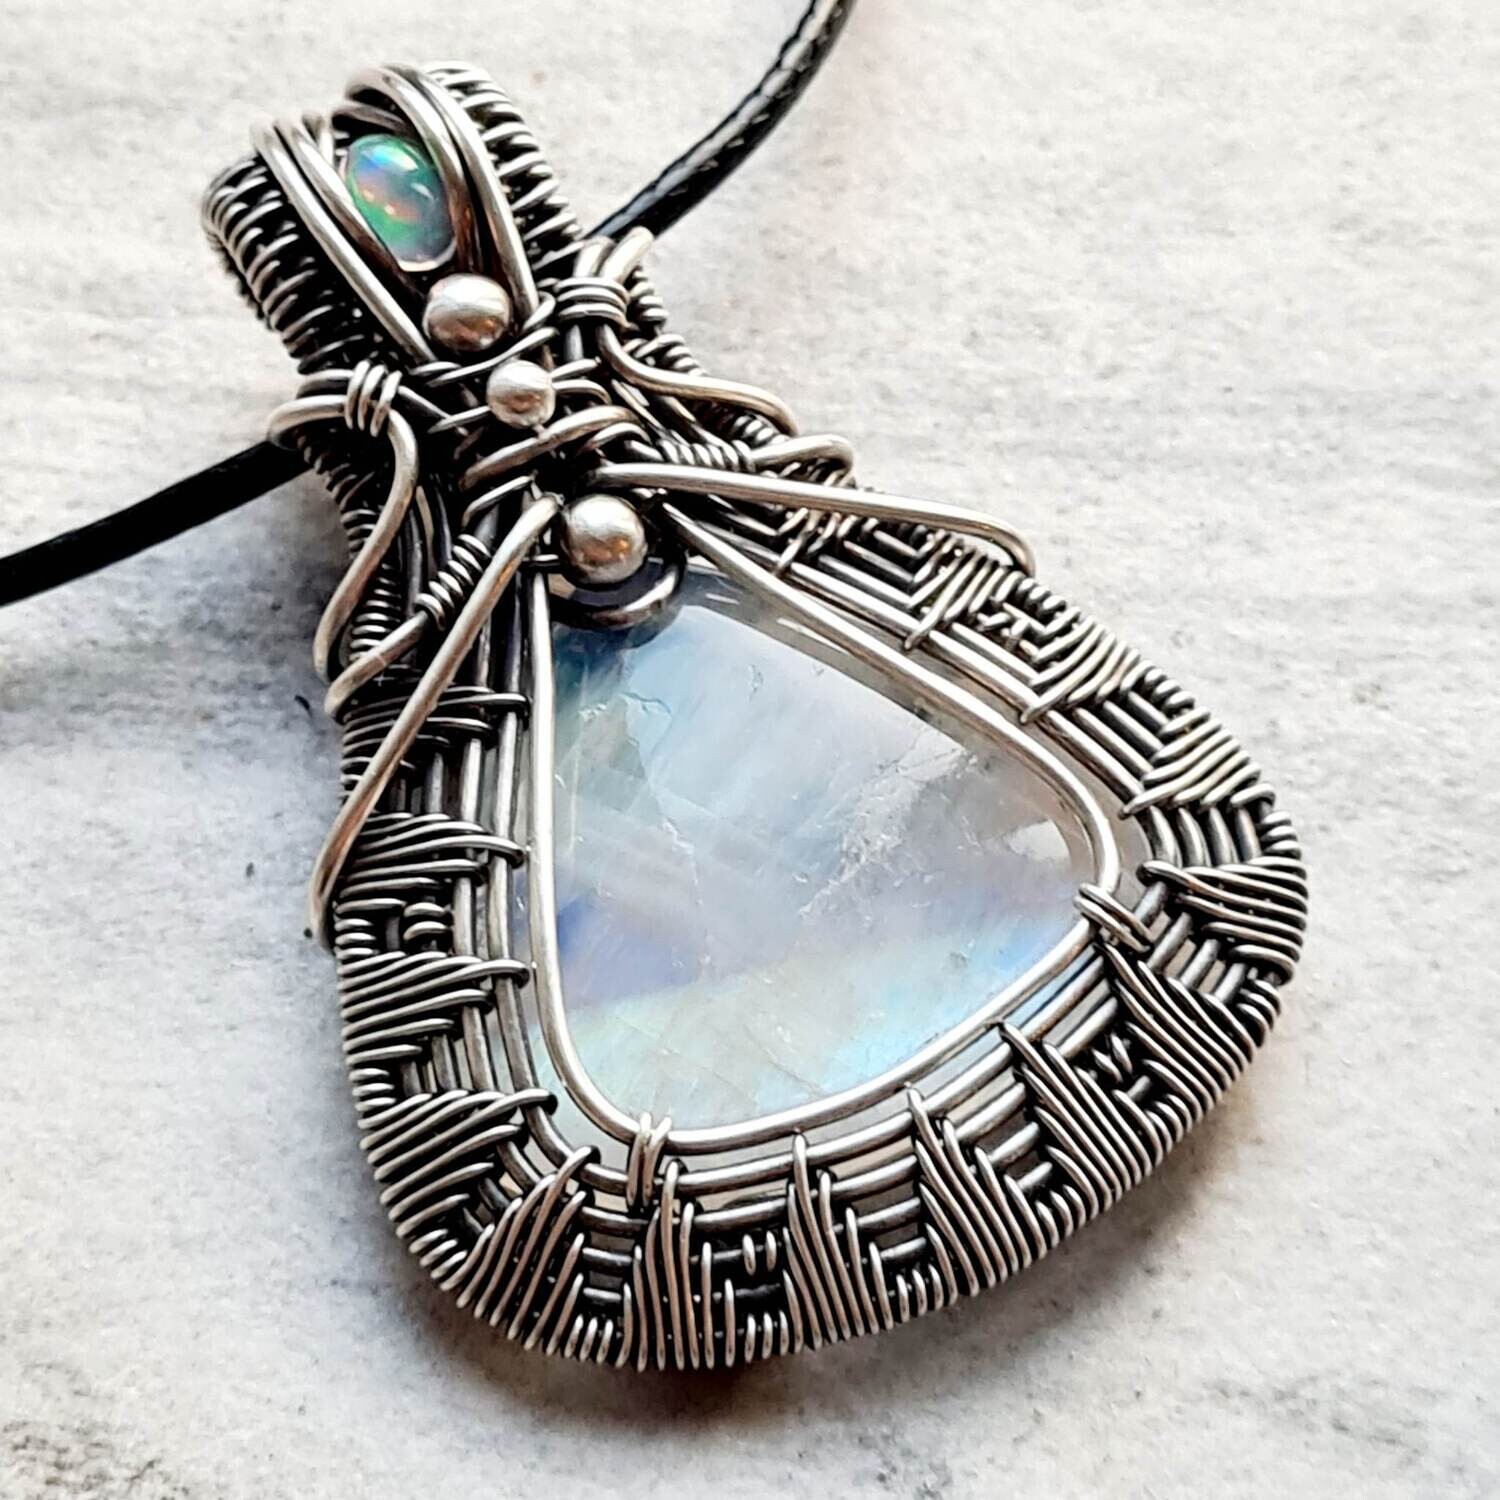 SERAPHINA - Rainbow Moonstone with WELO Opal accent in sterling silver with necklace.